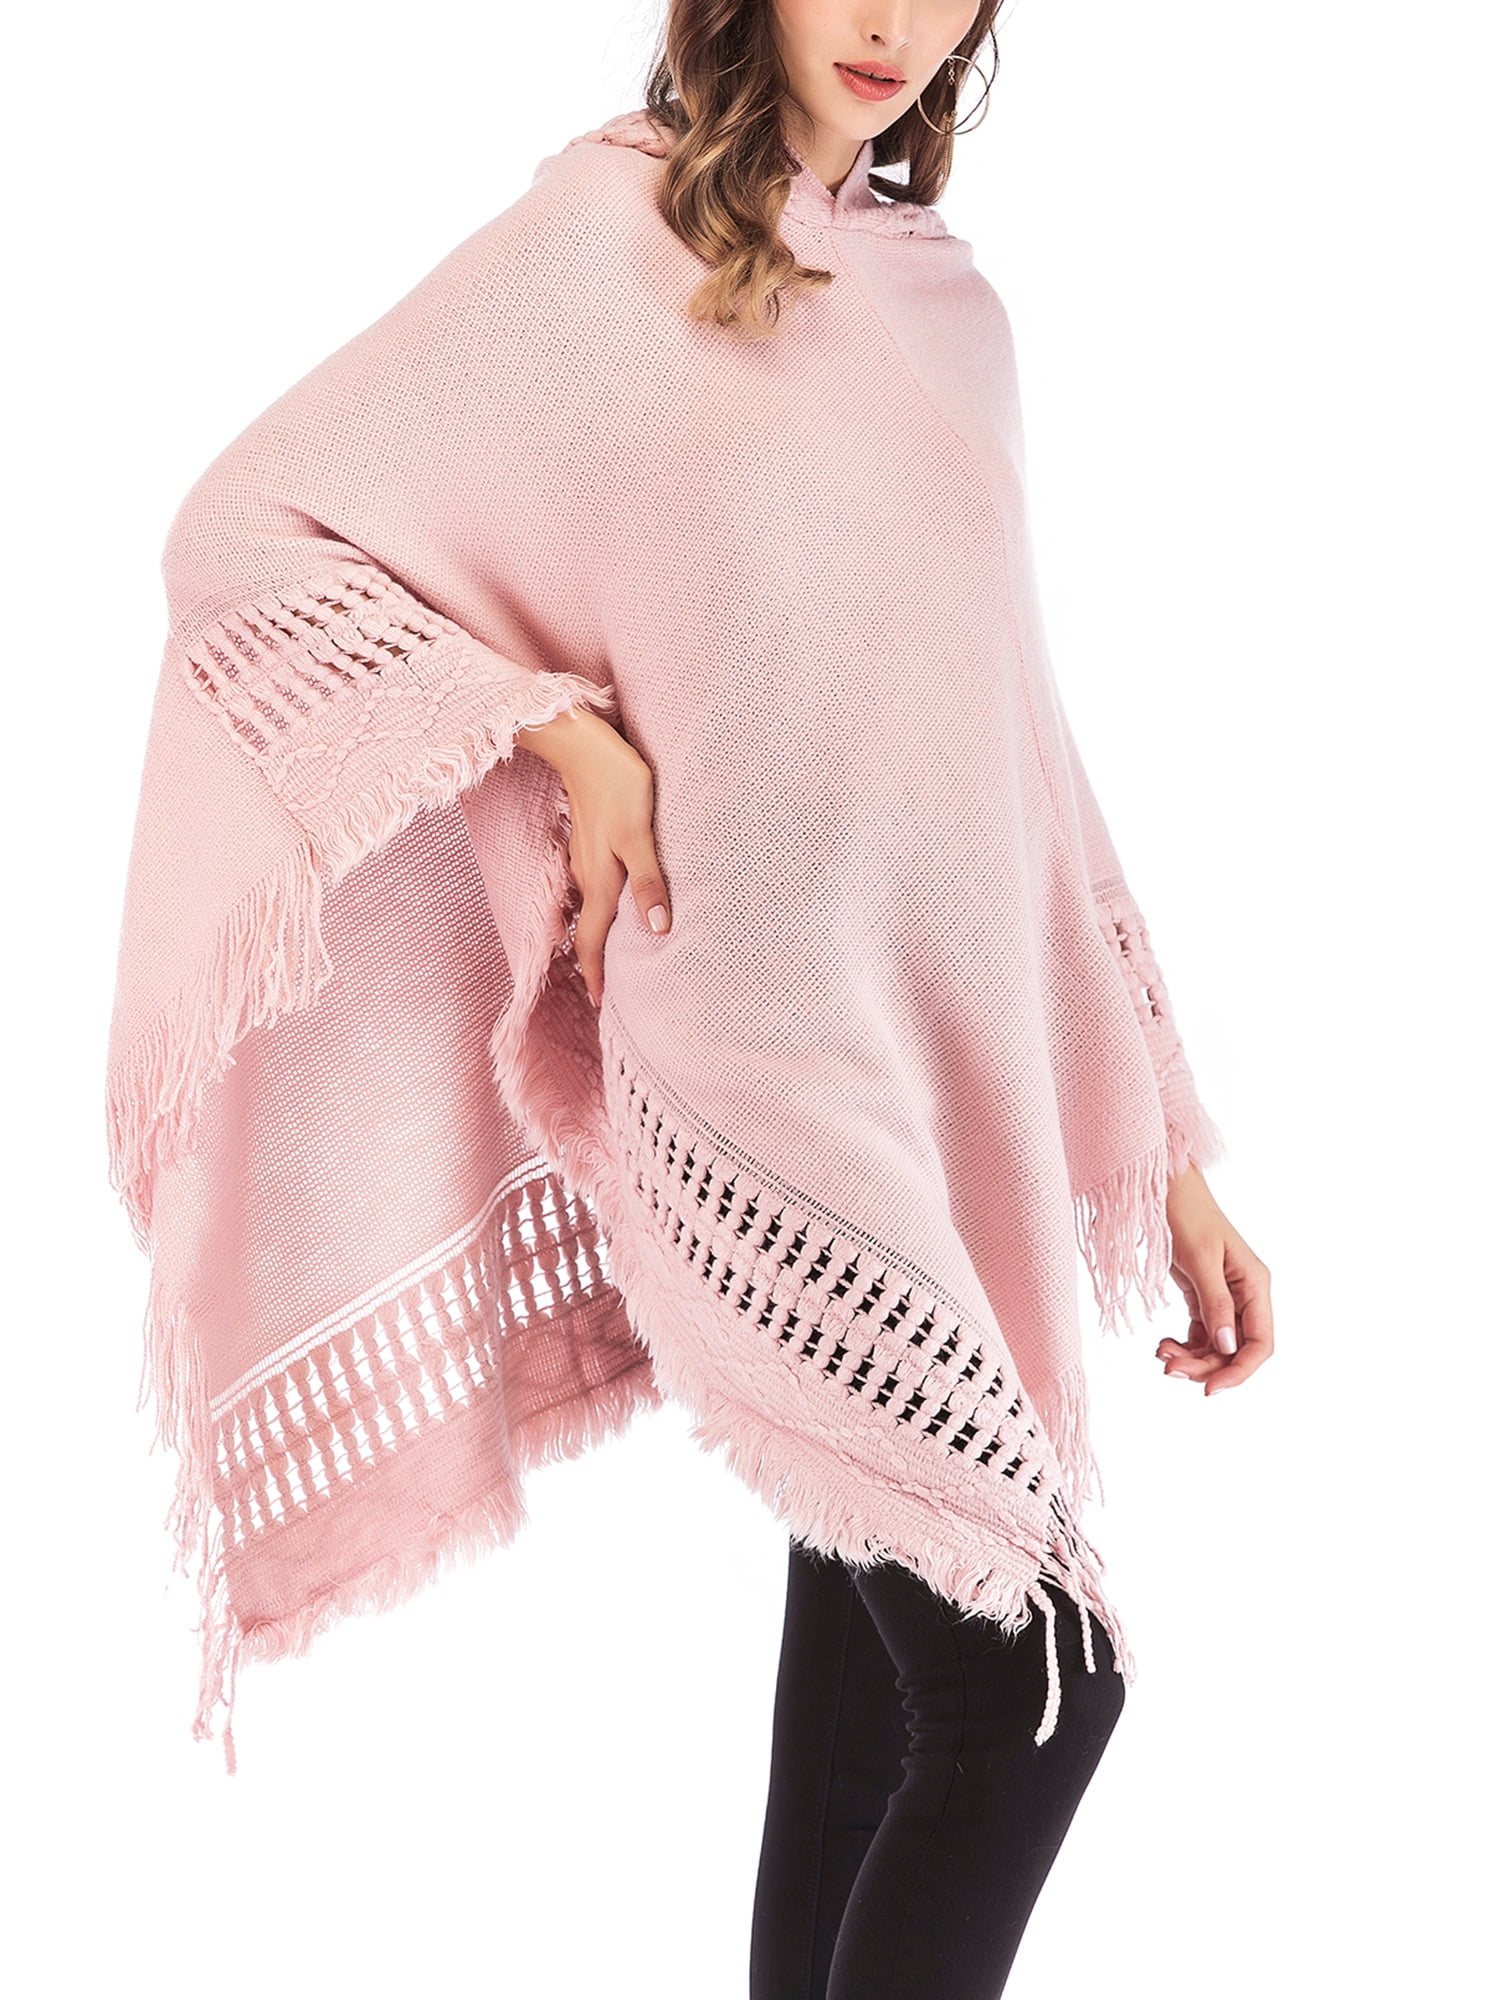 Comfy Cozy Versatile Poncho MADE IN USA Sweatshirt for Cold Weather Unisex Adult Poncho Style Sweater Fleece Cover Up with Muffler